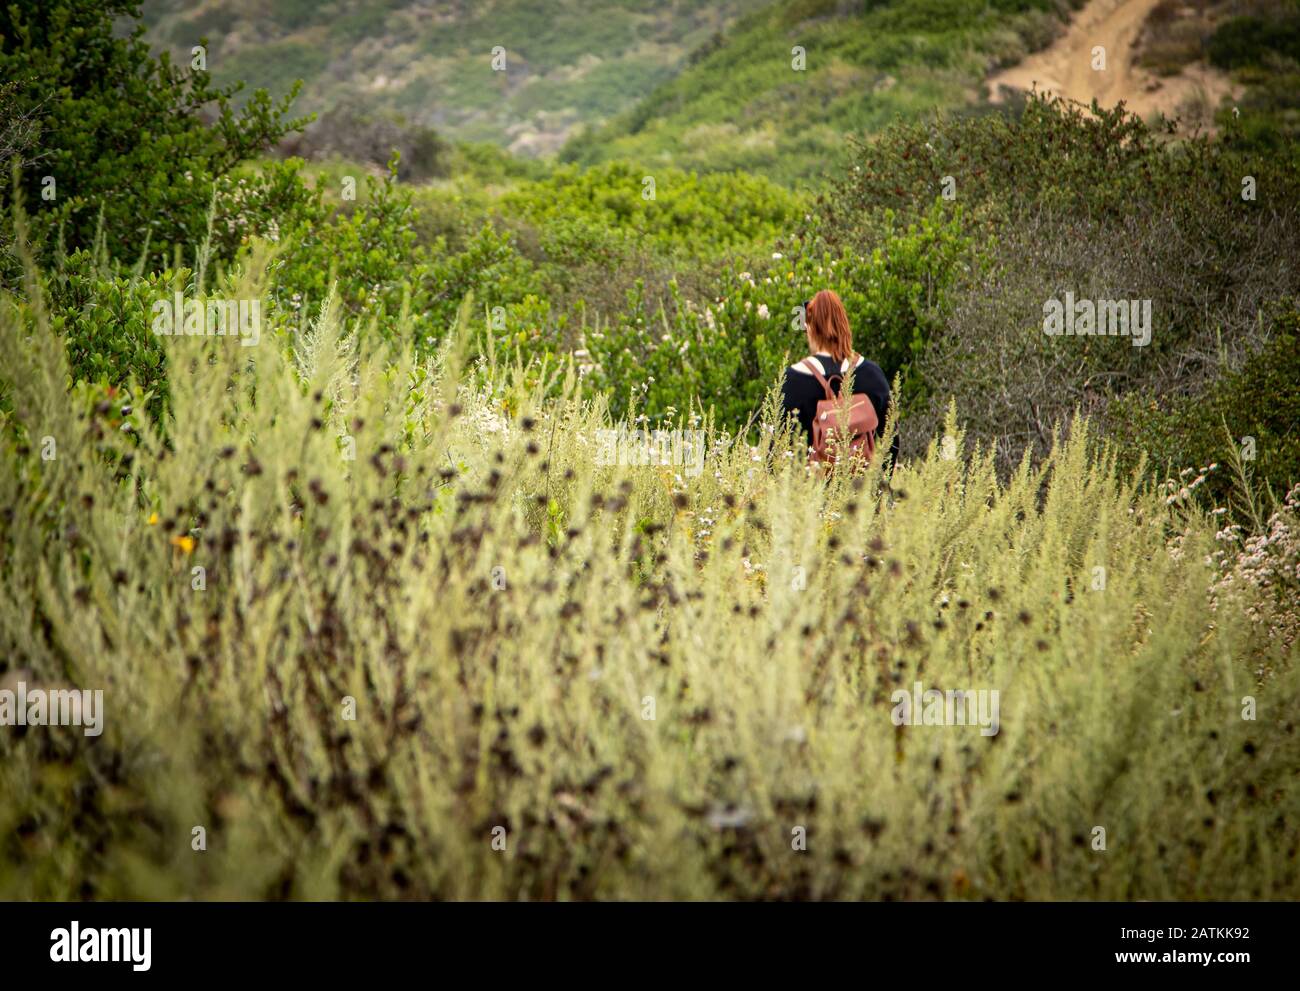 Wide shot of Red haired woman hiking in overgrown scrub brush Stock Photo